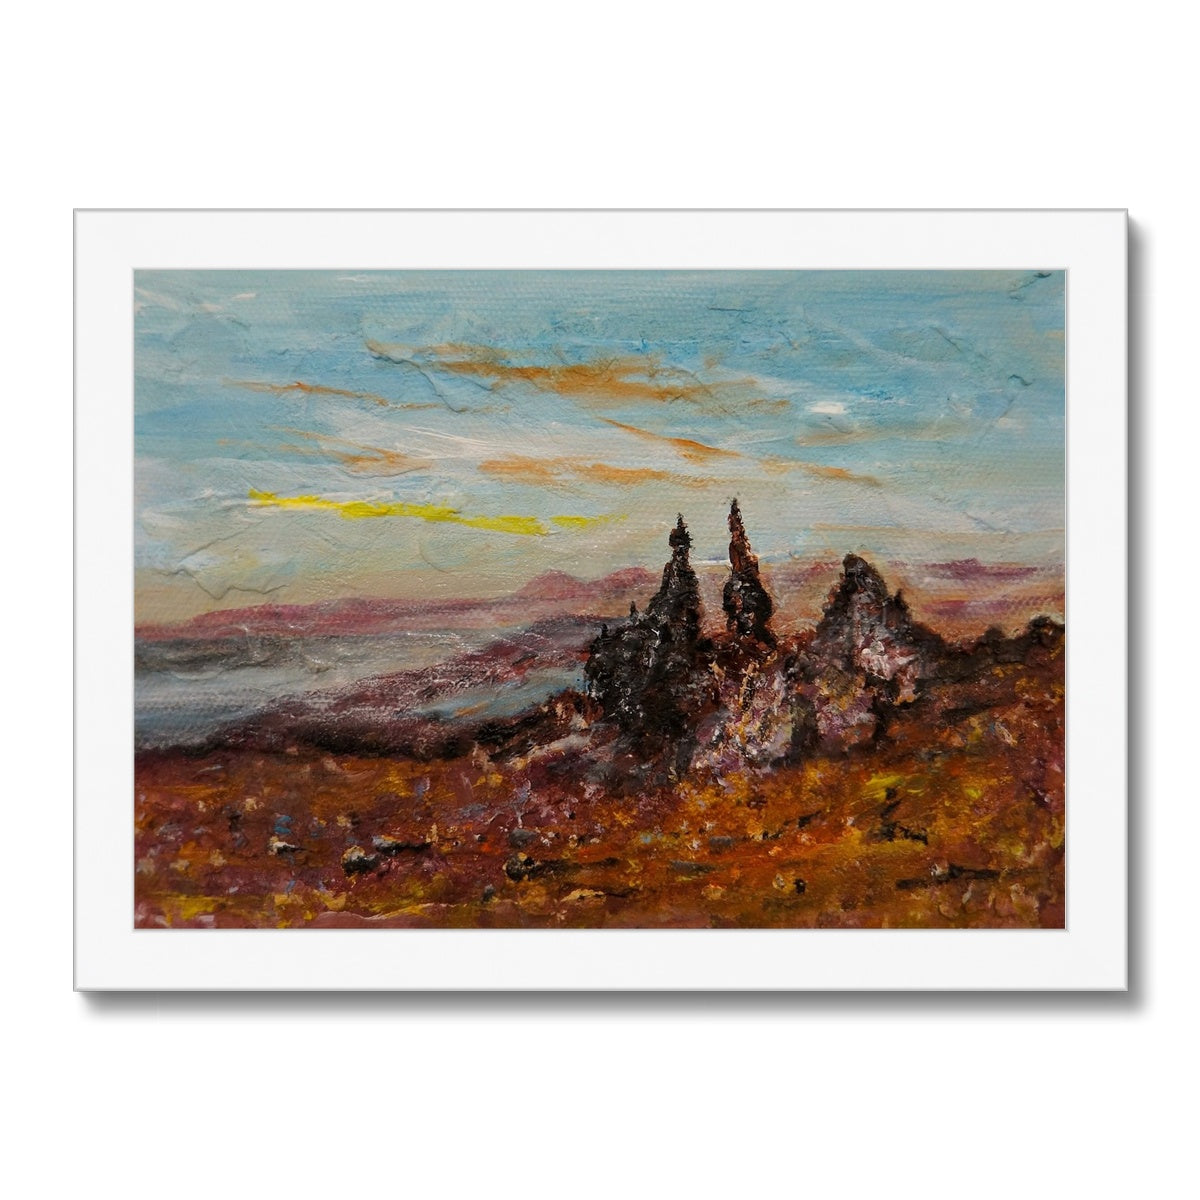 The Storr Skye Painting | Framed Prints From Scotland-Framed Prints-Skye Art Gallery-A4 Landscape-White Frame-Paintings, Prints, Homeware, Art Gifts From Scotland By Scottish Artist Kevin Hunter